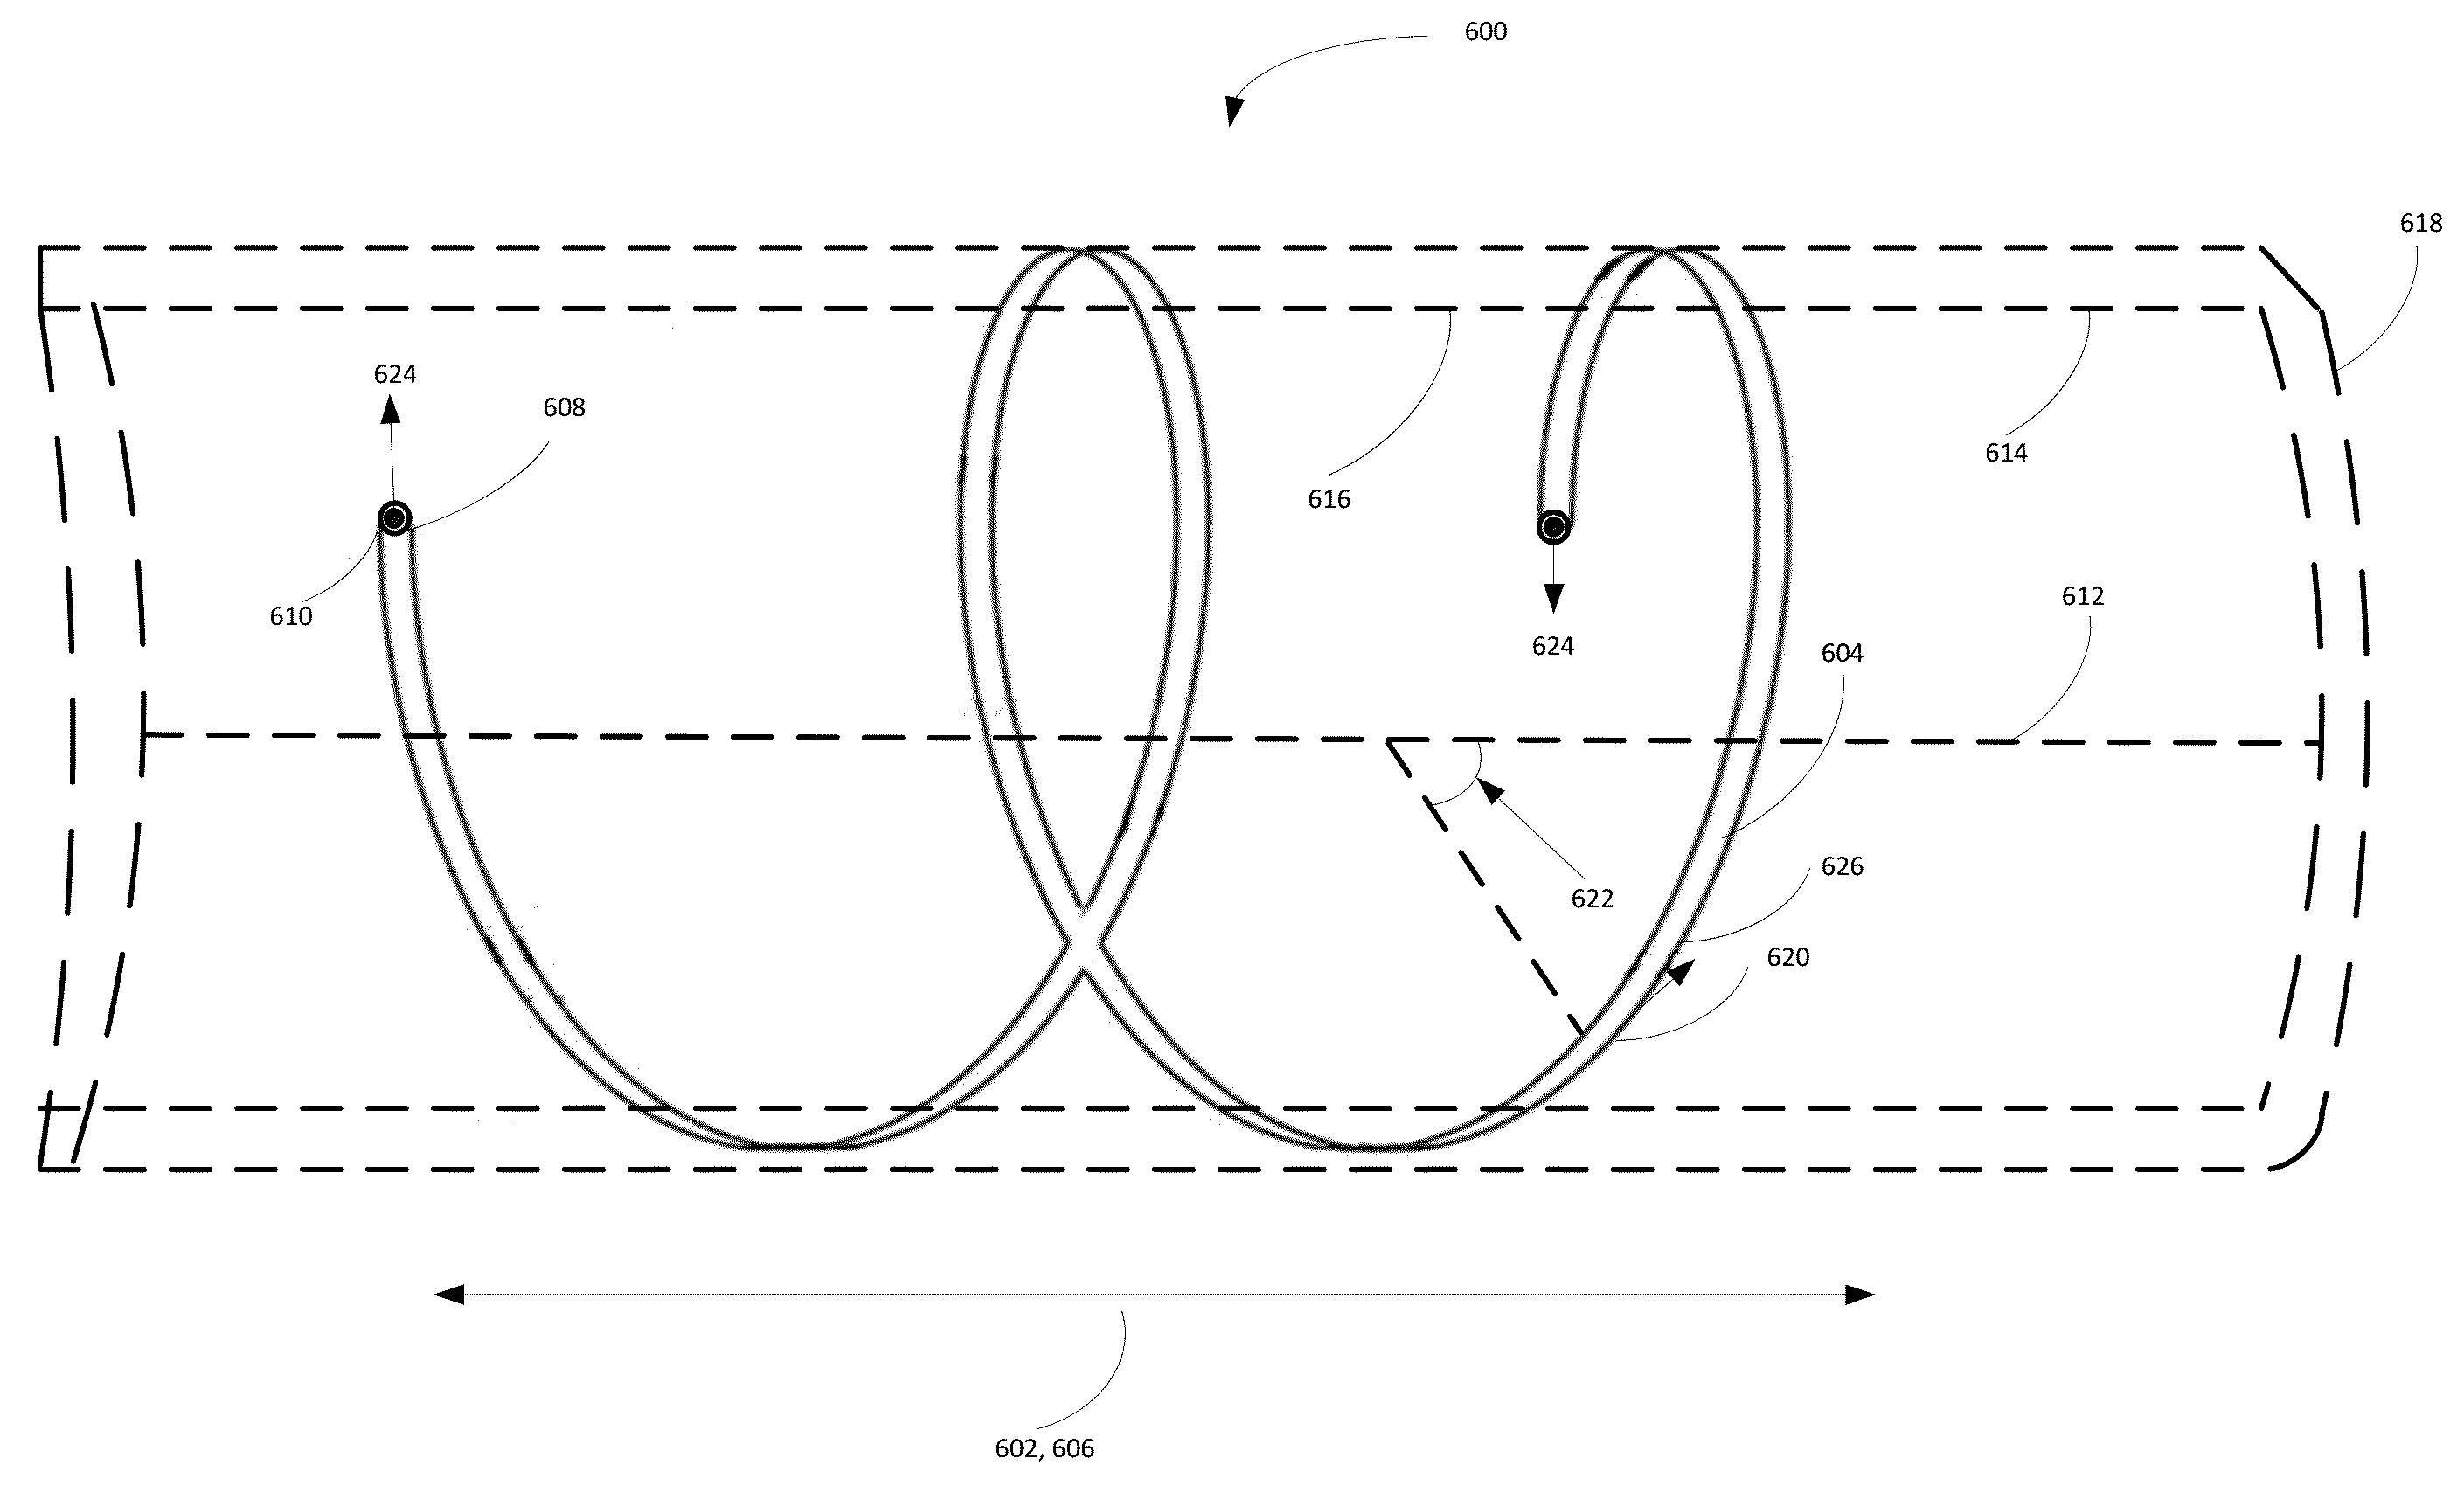 Optical fiber with distributed bend compensated filtering